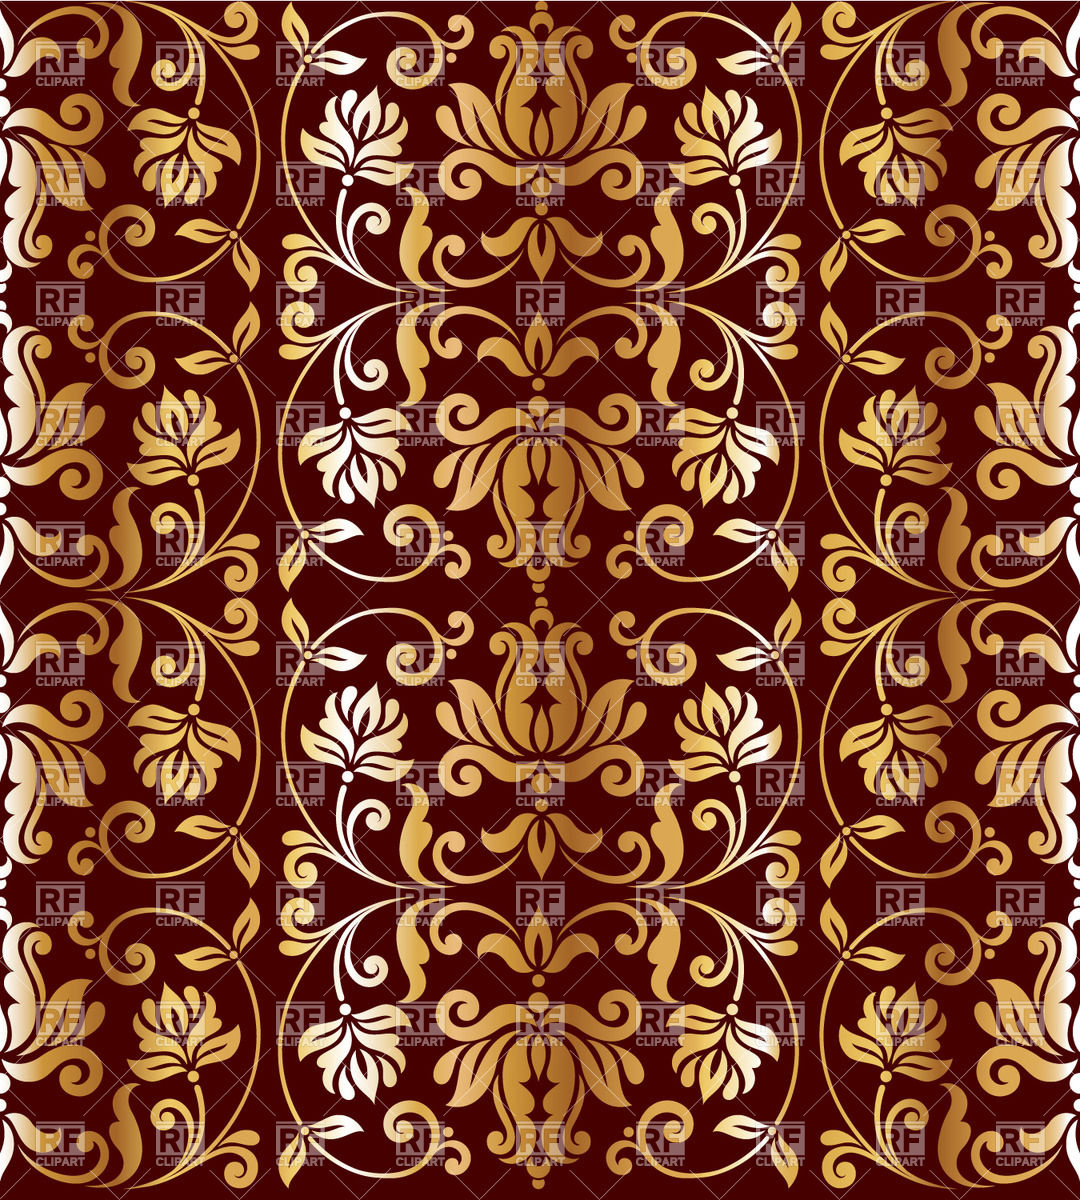 Wallpaper With Floral Elements Golden Retro Ornament On Burgundy